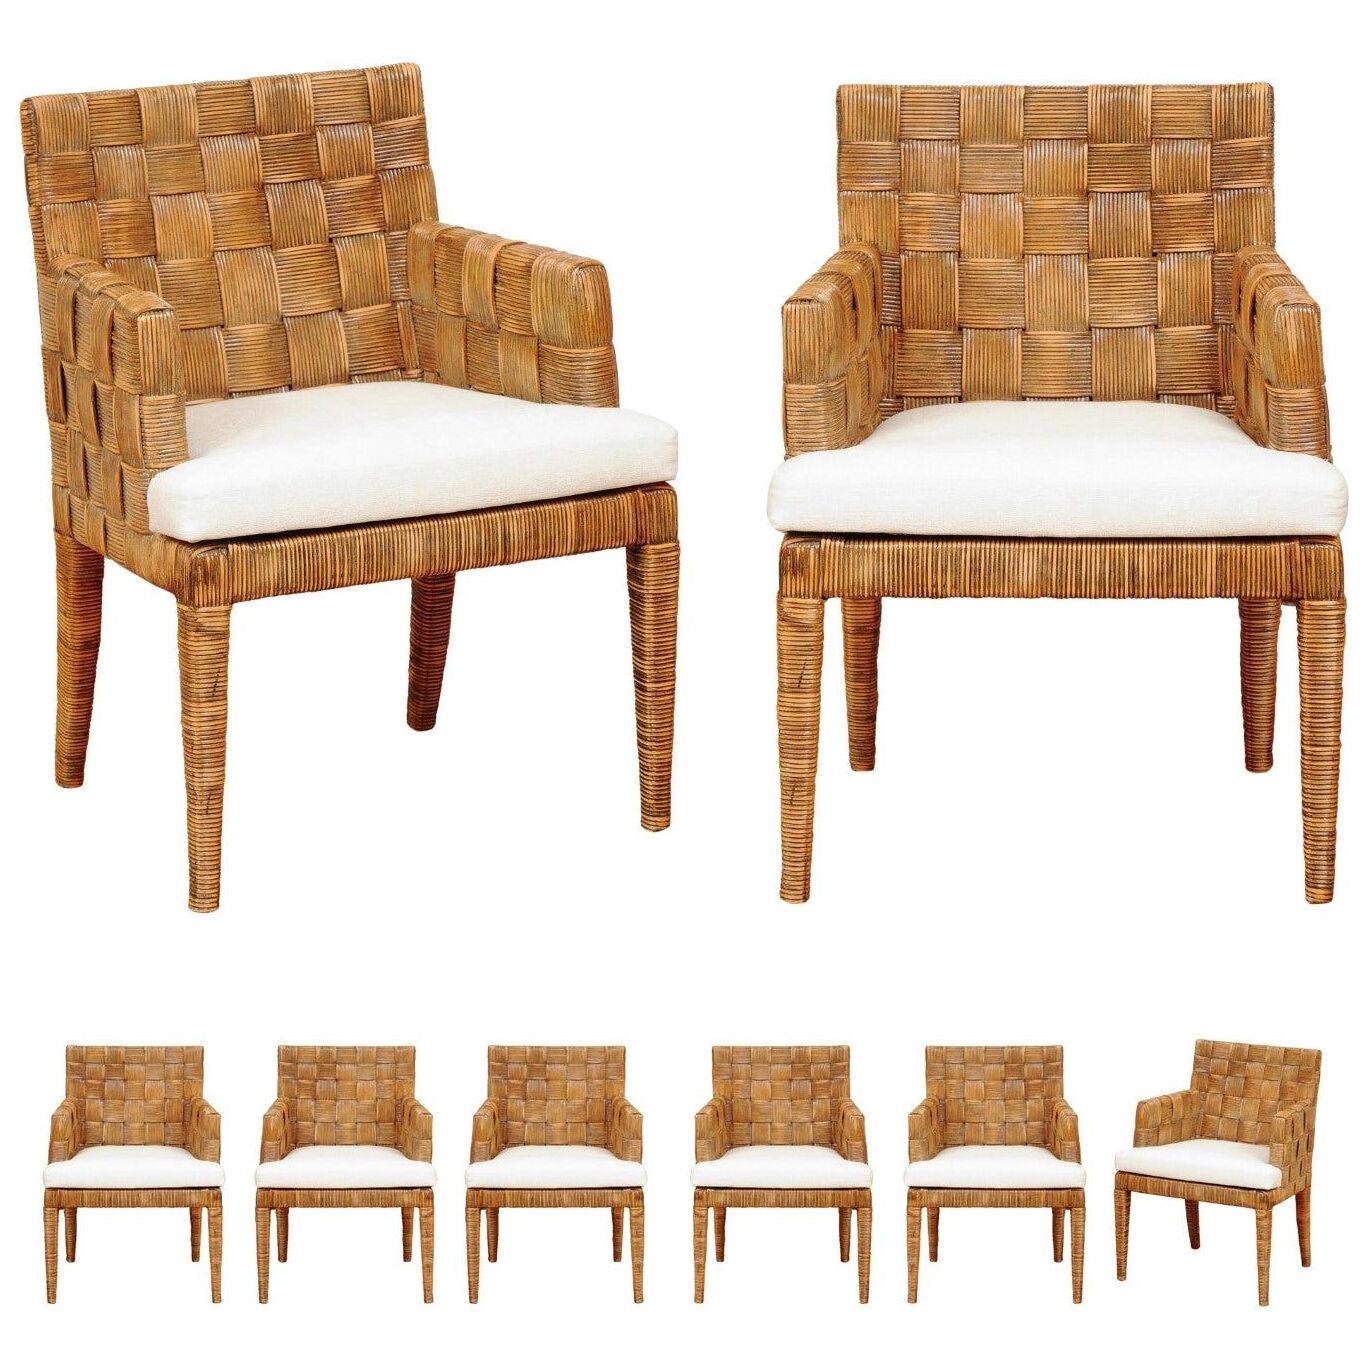 Stellar Set of 8 Block Island Arm Dining Chairs by John Hutton for Donghia